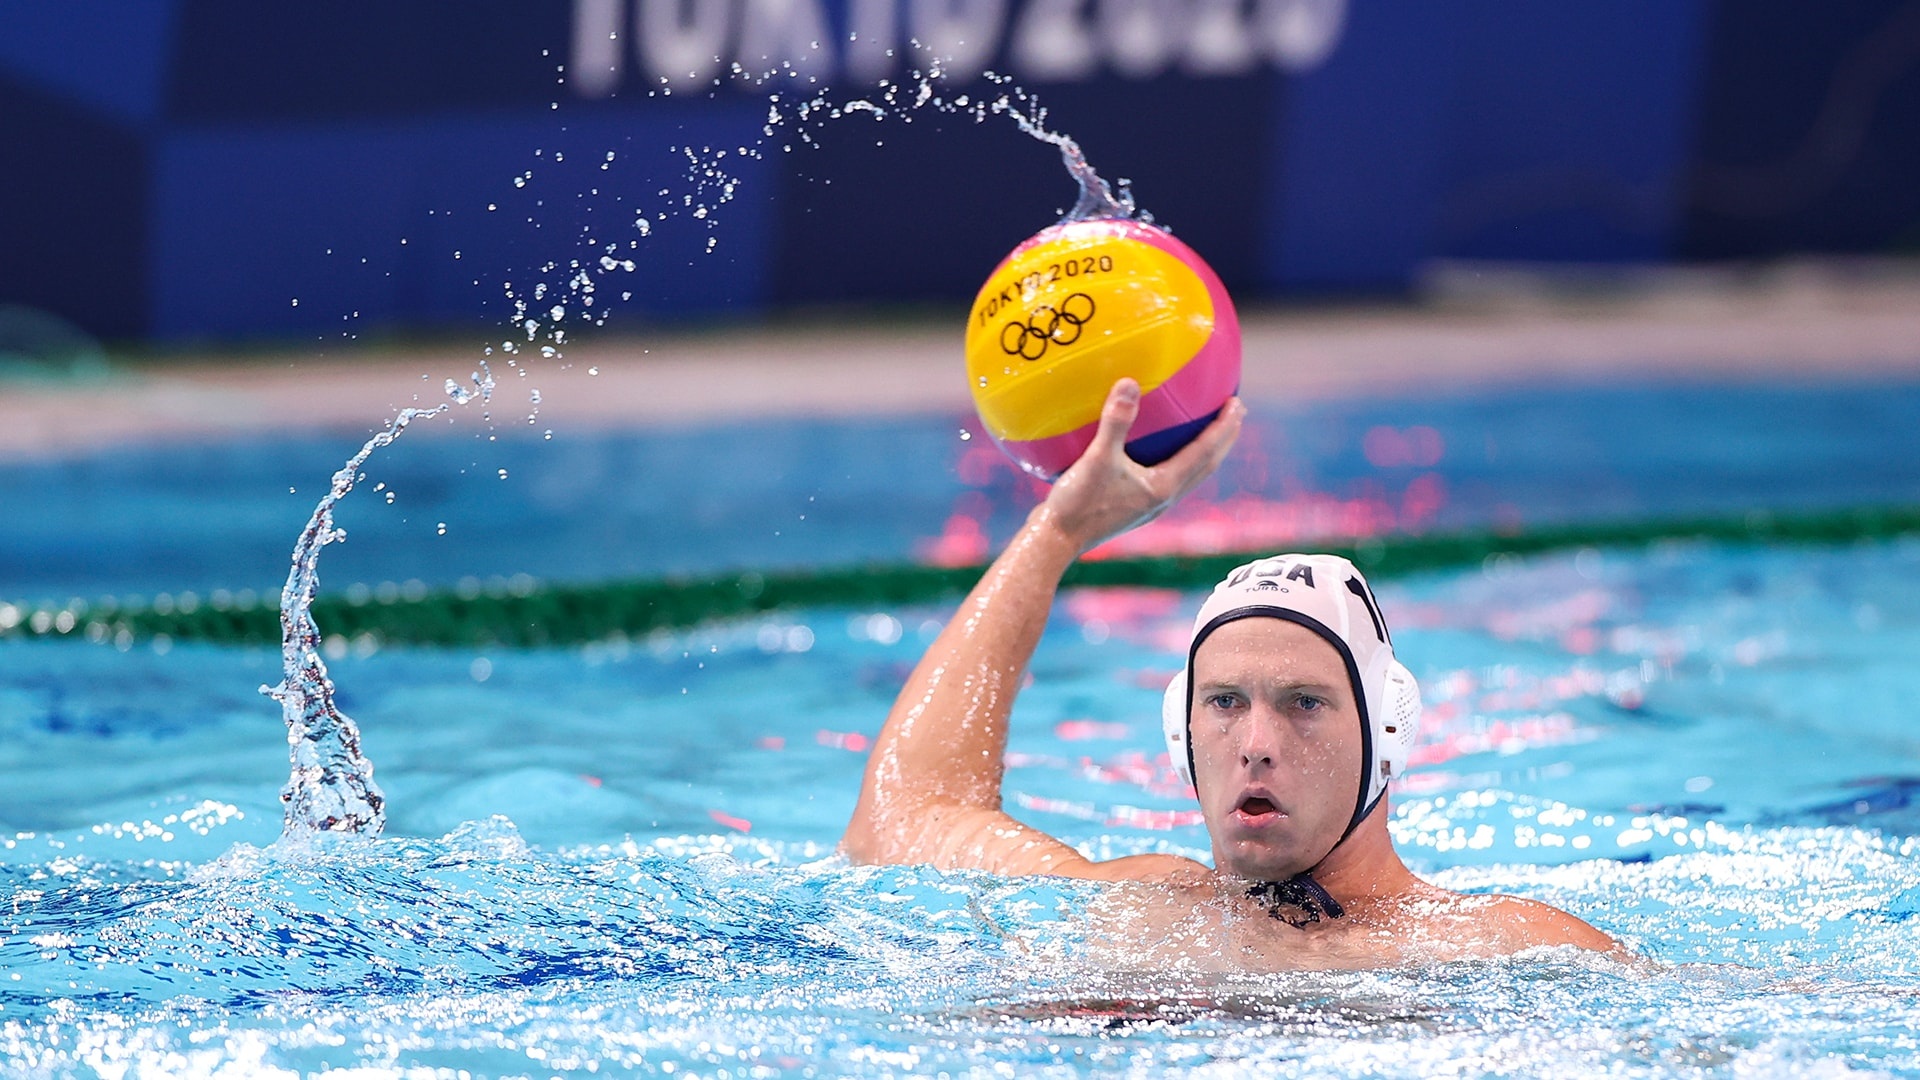 Water Polo: The USA vs. Japan, The 2020 Tokyo Summer Olympic Games. 1920x1080 Full HD Background.